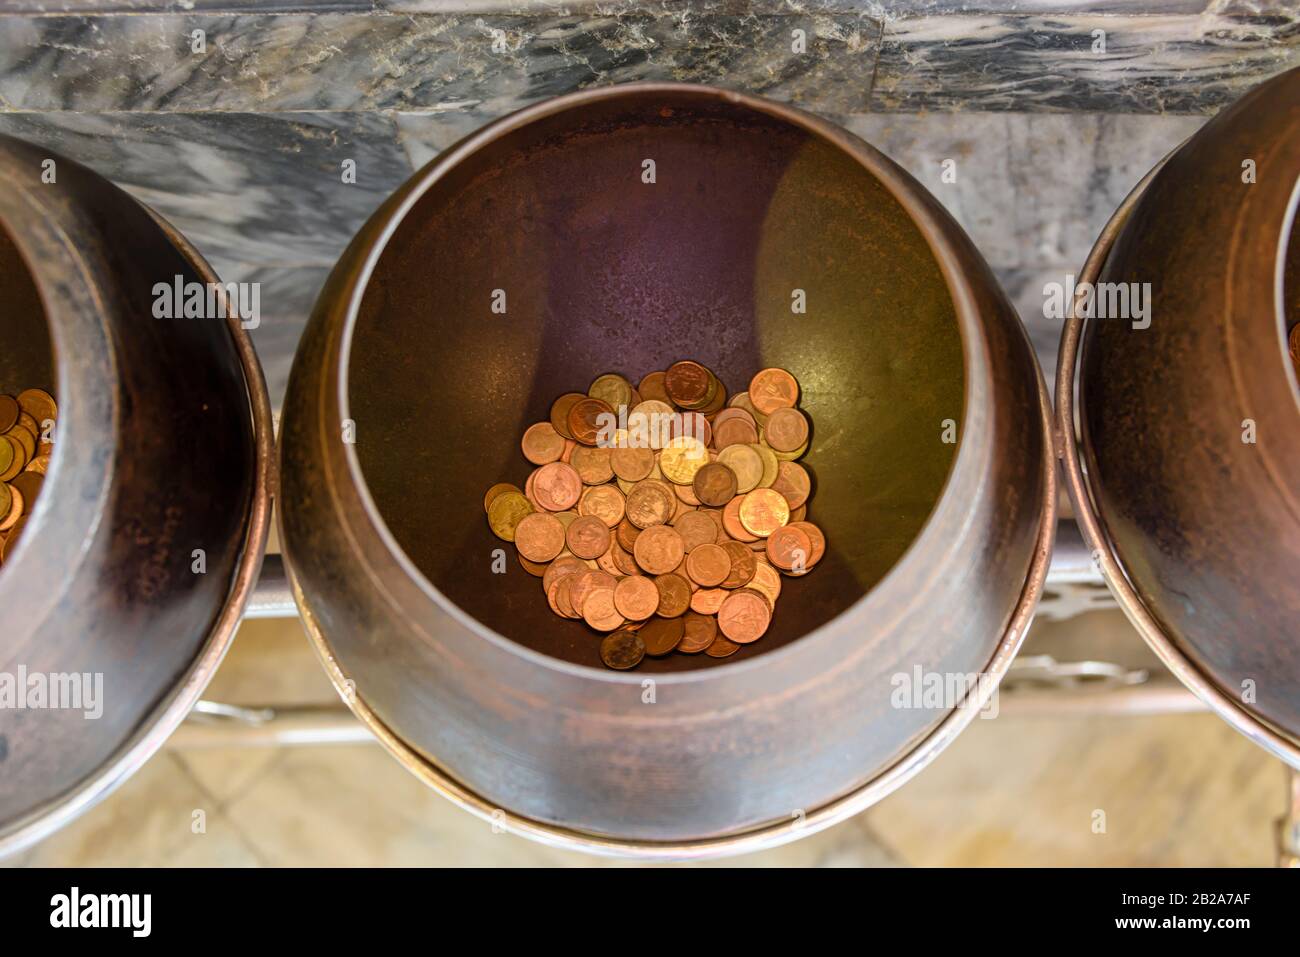 One of 108 old brass bowls with coins at Wat Pho.  It is believed placing coins in them brings good luck.  Bangkok, Thailand Stock Photo